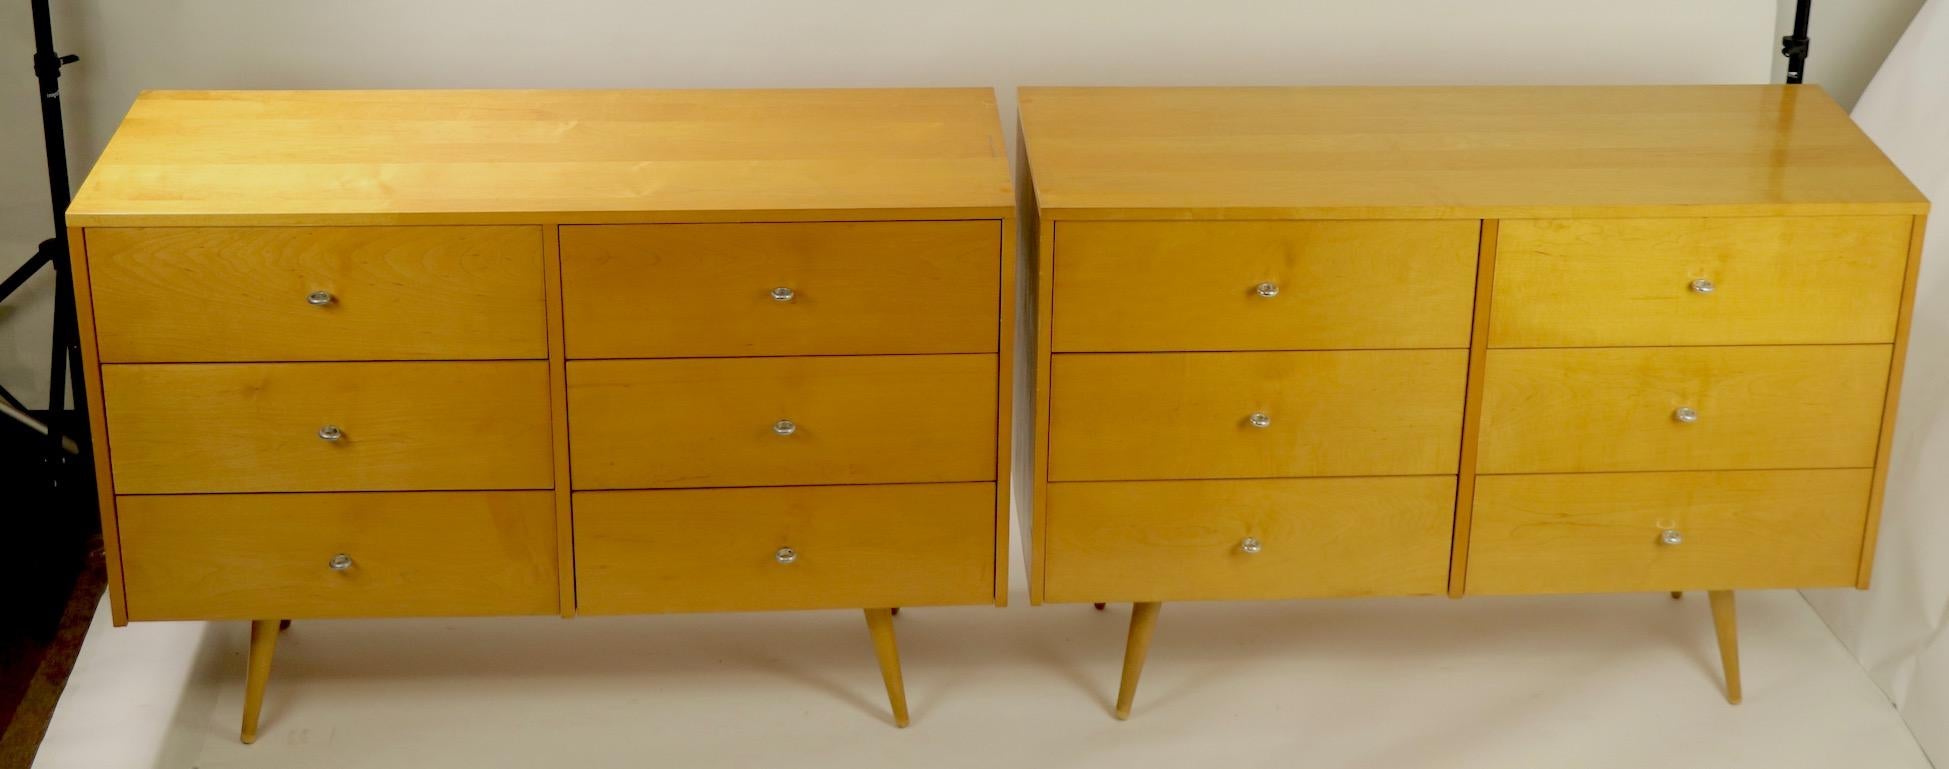 3 Piece Paul McCobb Planner Group Vanity and Chest of Drawers 4